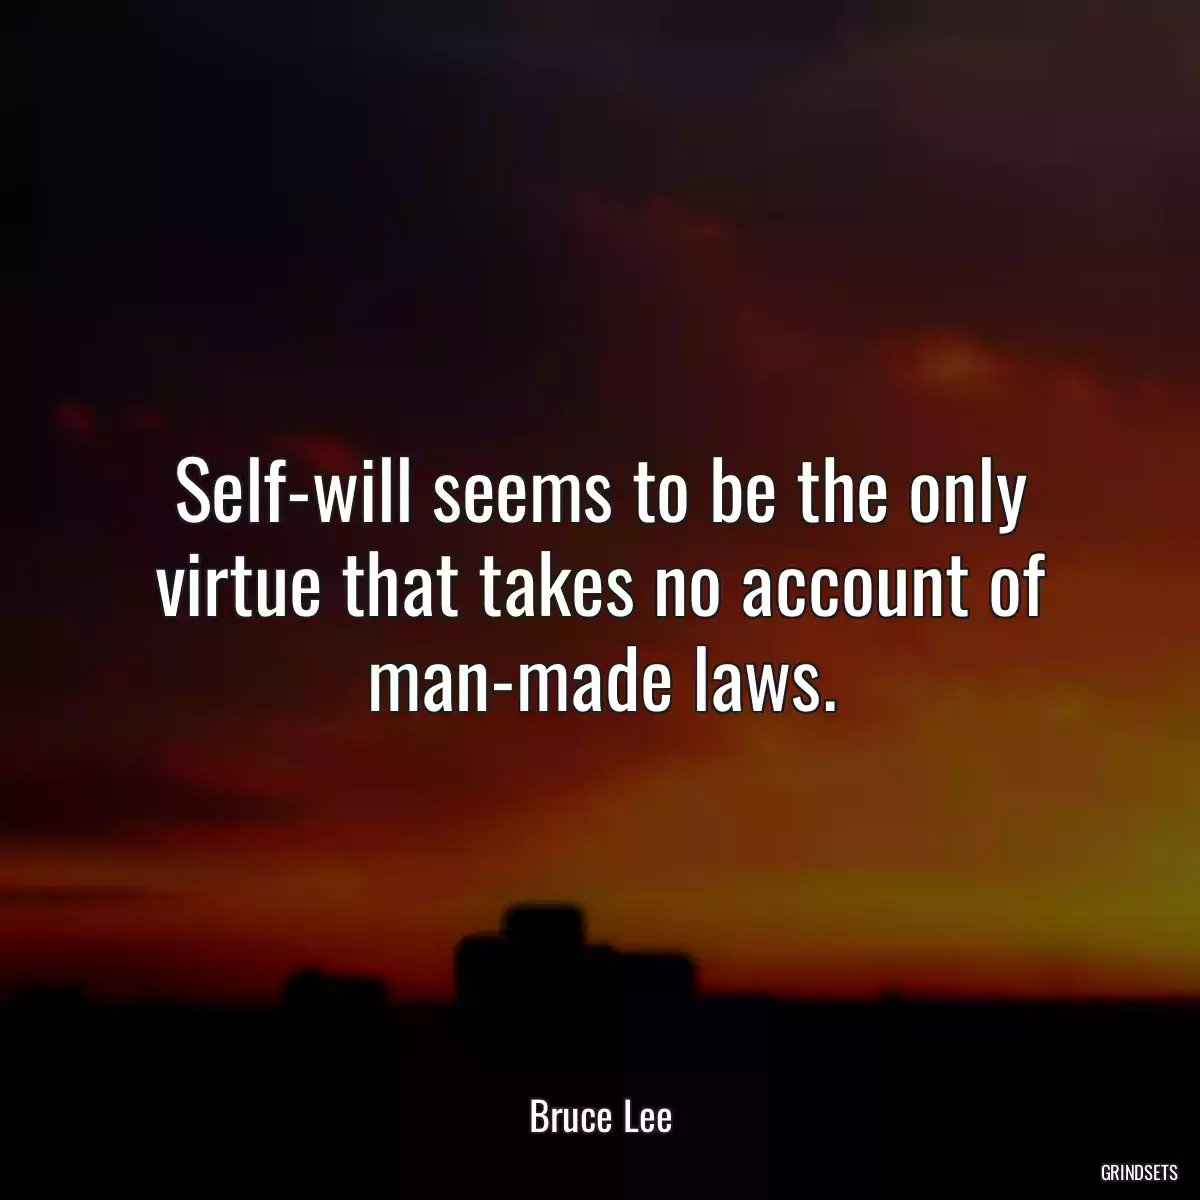 Self-will seems to be the only virtue that takes no account of man-made laws.